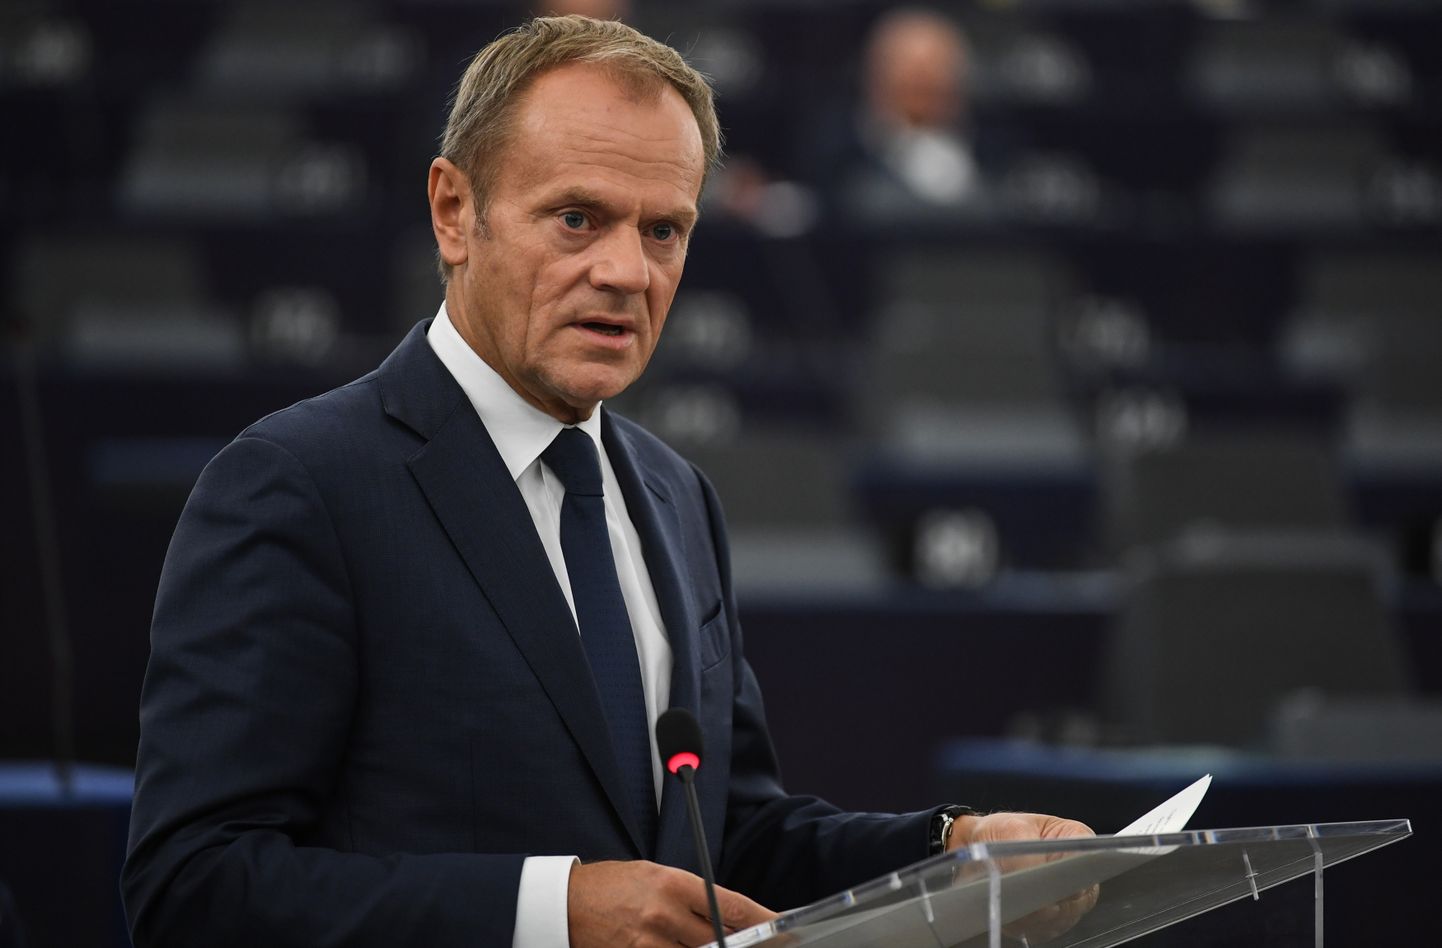 epa07939774 European Council President Donald Tusk speaks at a debate on the last EU summit and Brexit at the European Parliament in Strasbourg, France, 22 October 2019.  EPA/PATRICK SEEGER